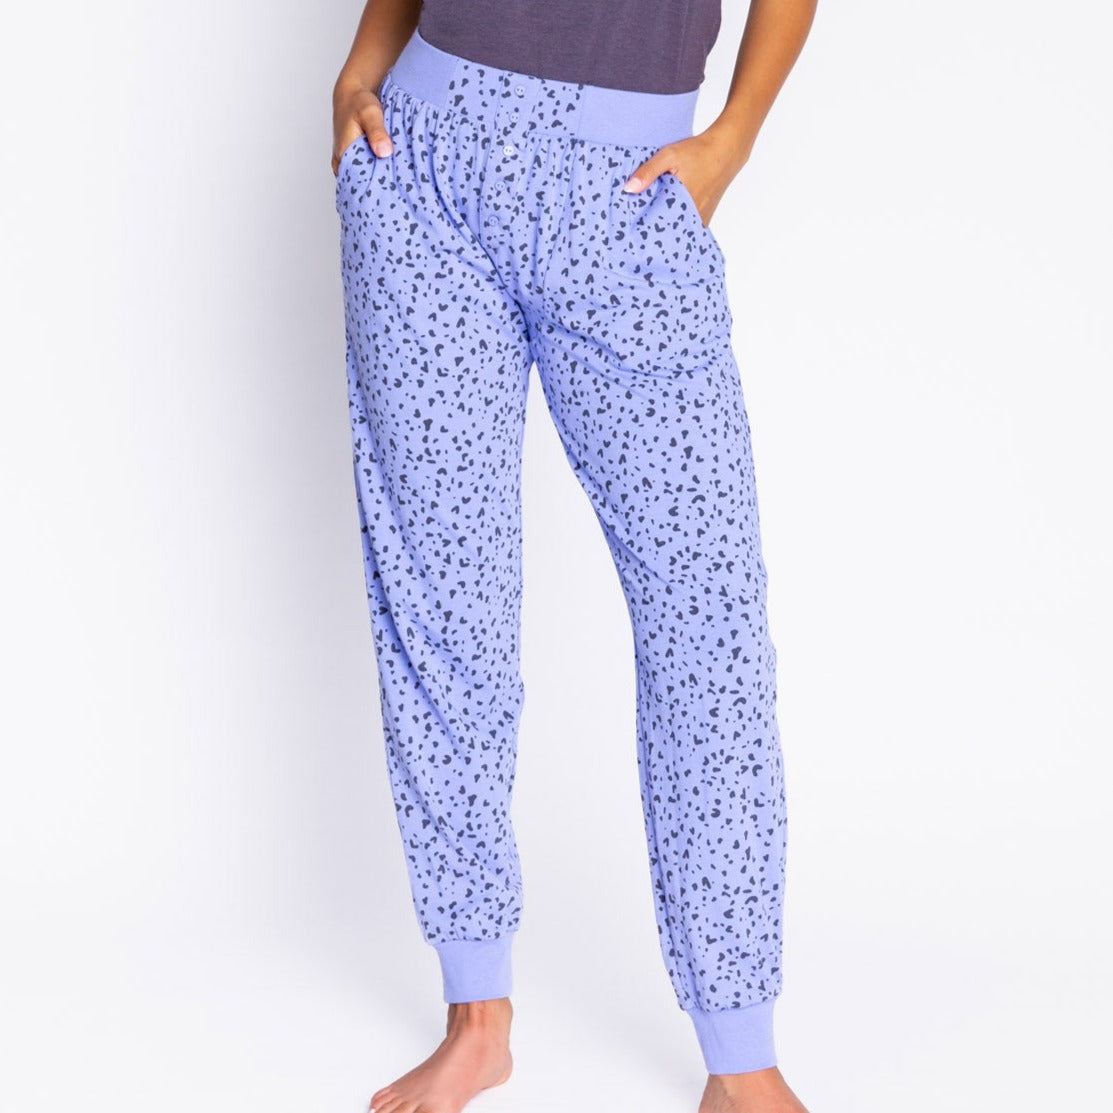 Molly Modal Jam Pant - RGMMP - Periwinkle/Charcoal